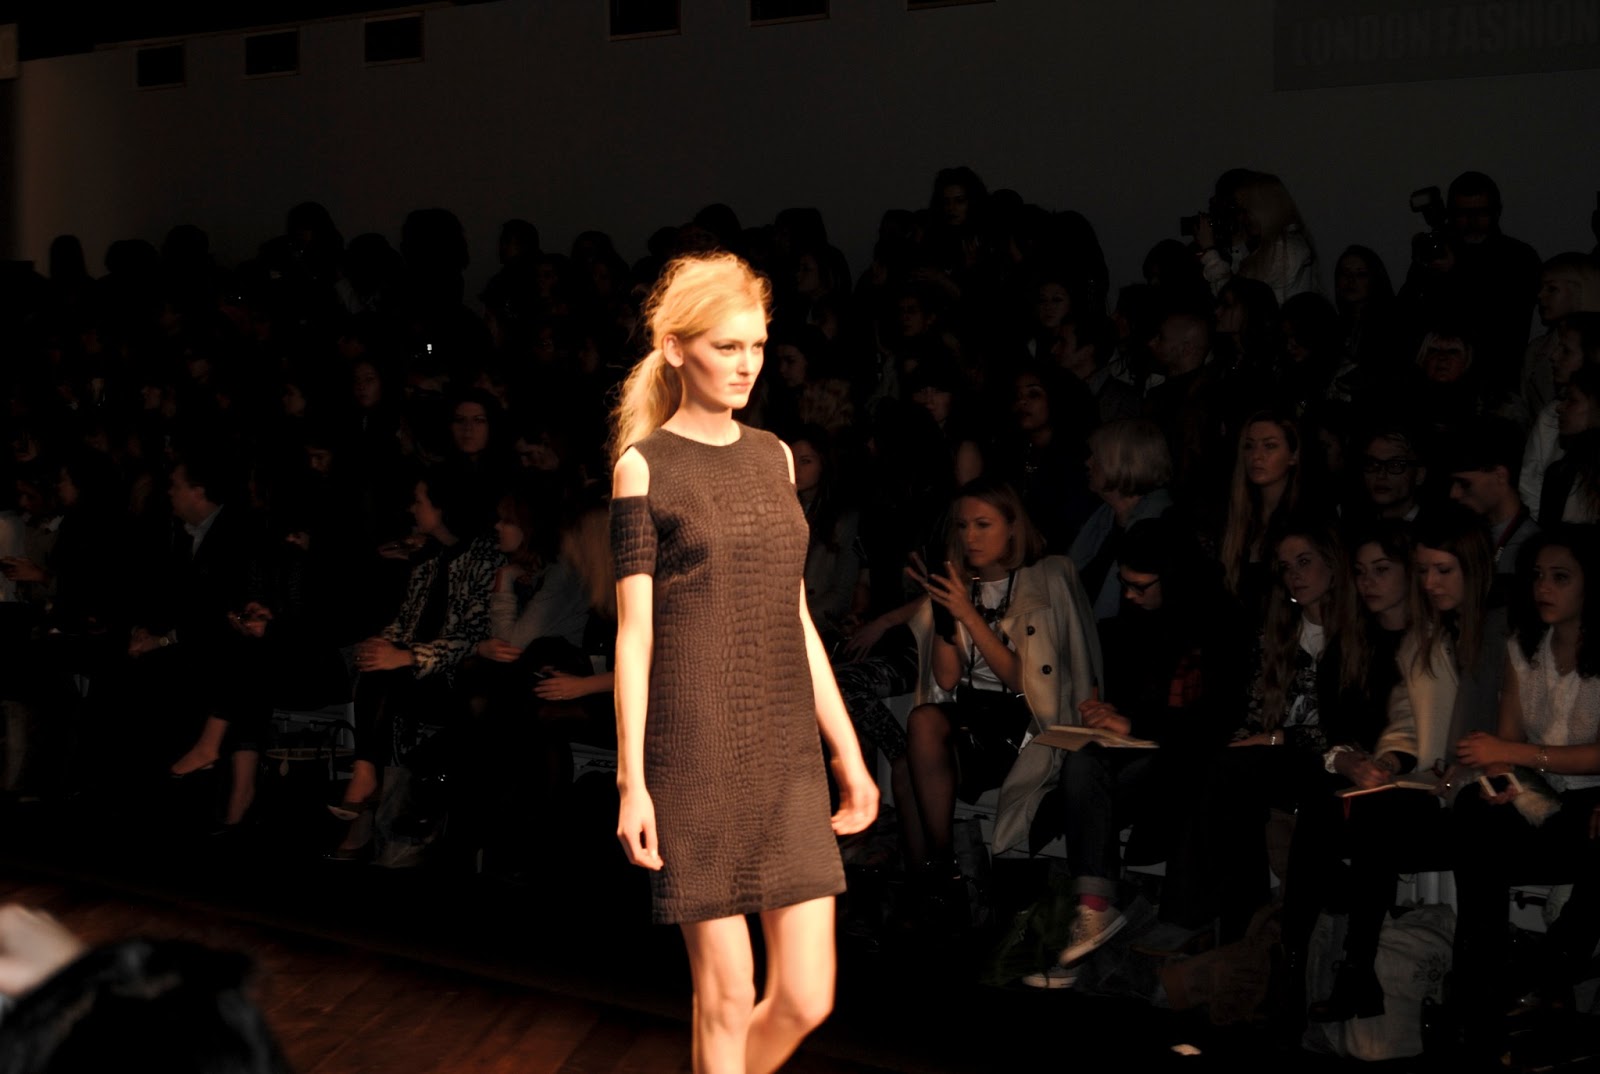 Dress Me, I'm Your Mannequin...: London Fashion Week AW13 - Day 1 Summary